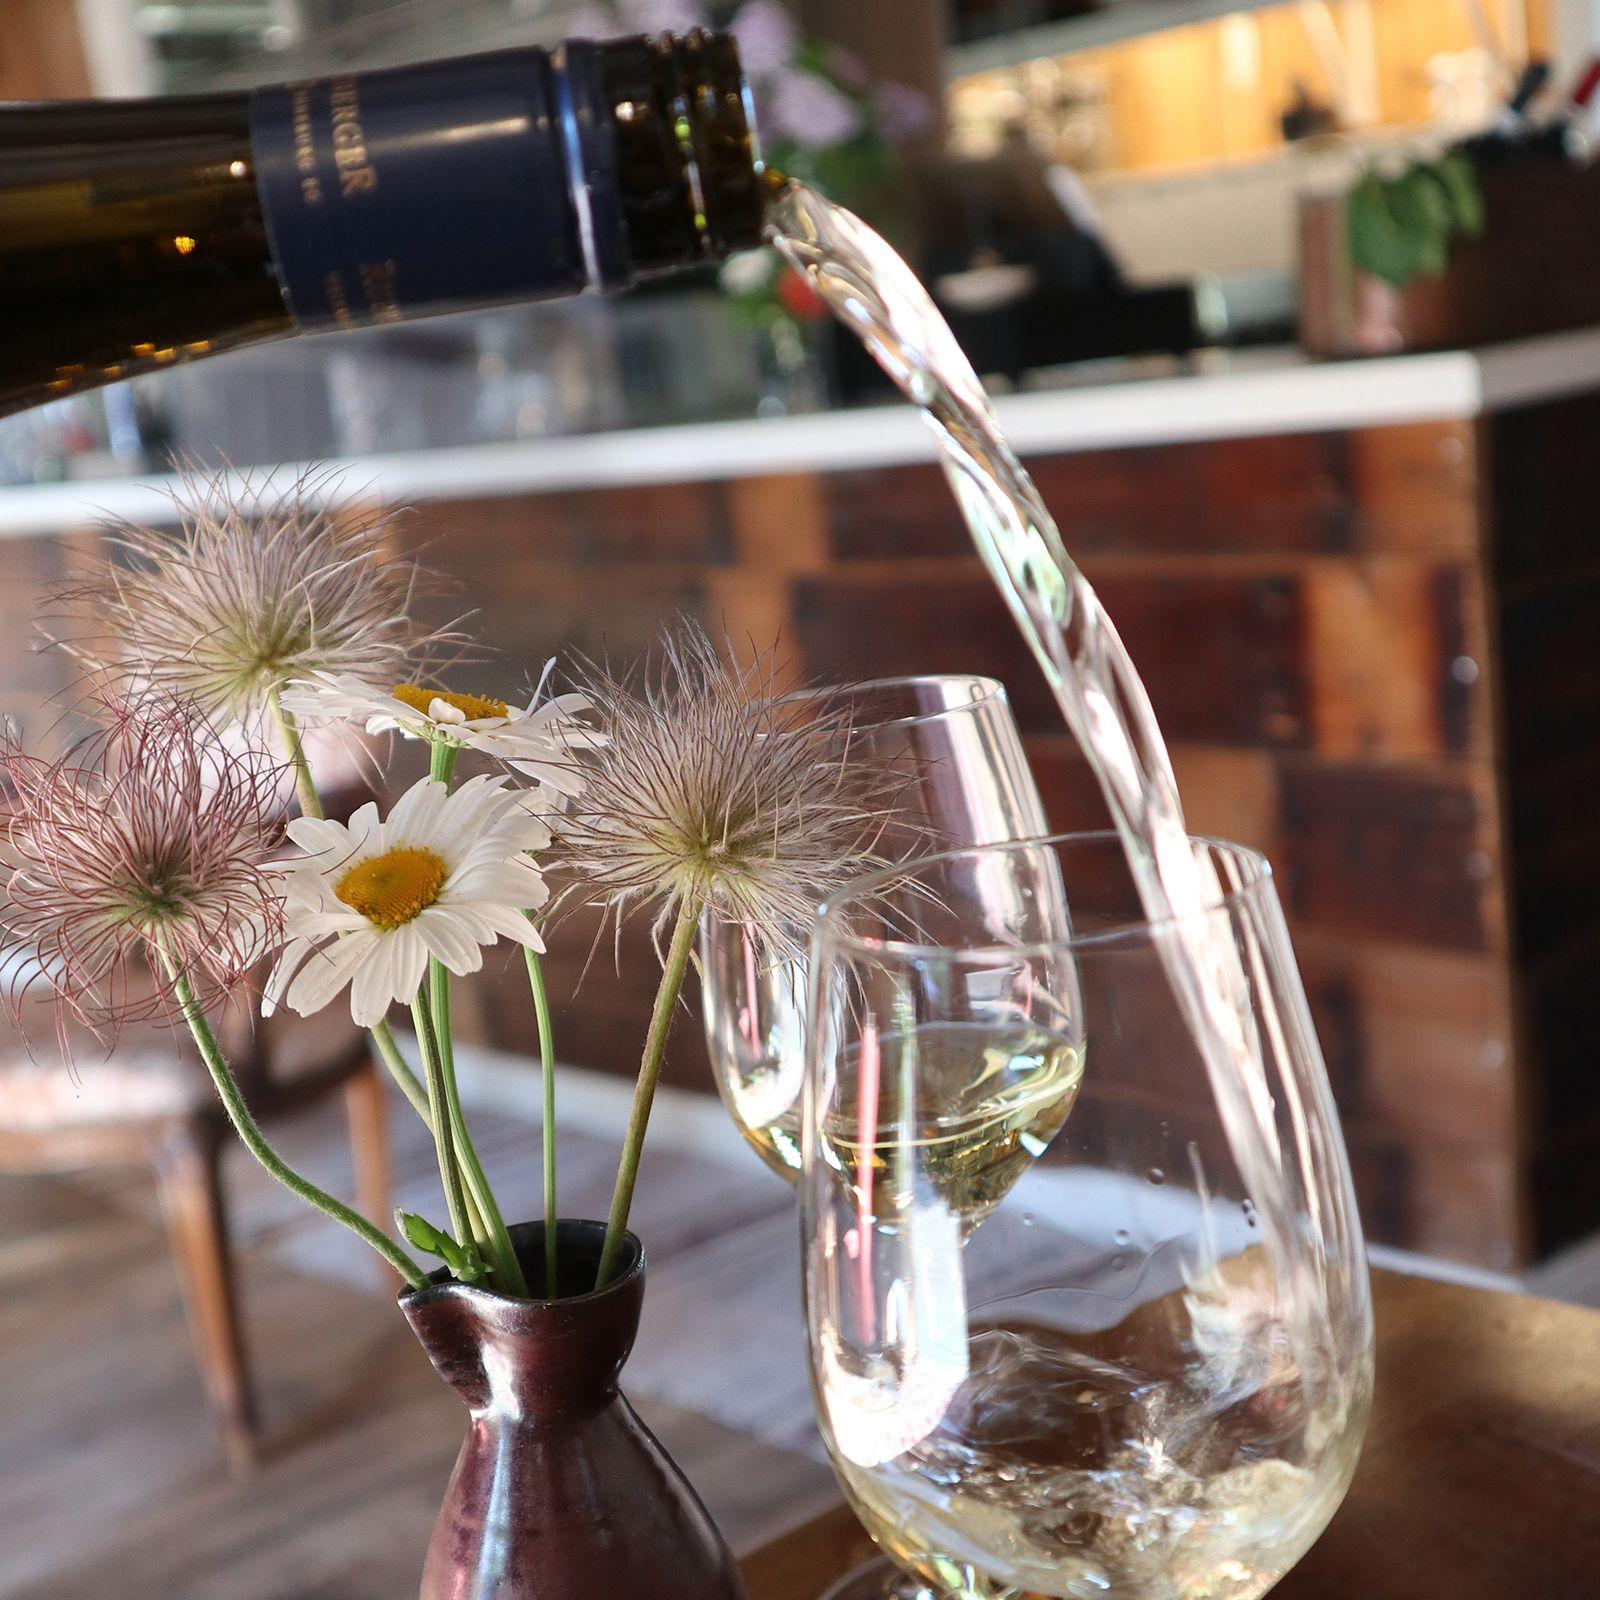 A bottle of wine is poured into a glass at Källarvinden.